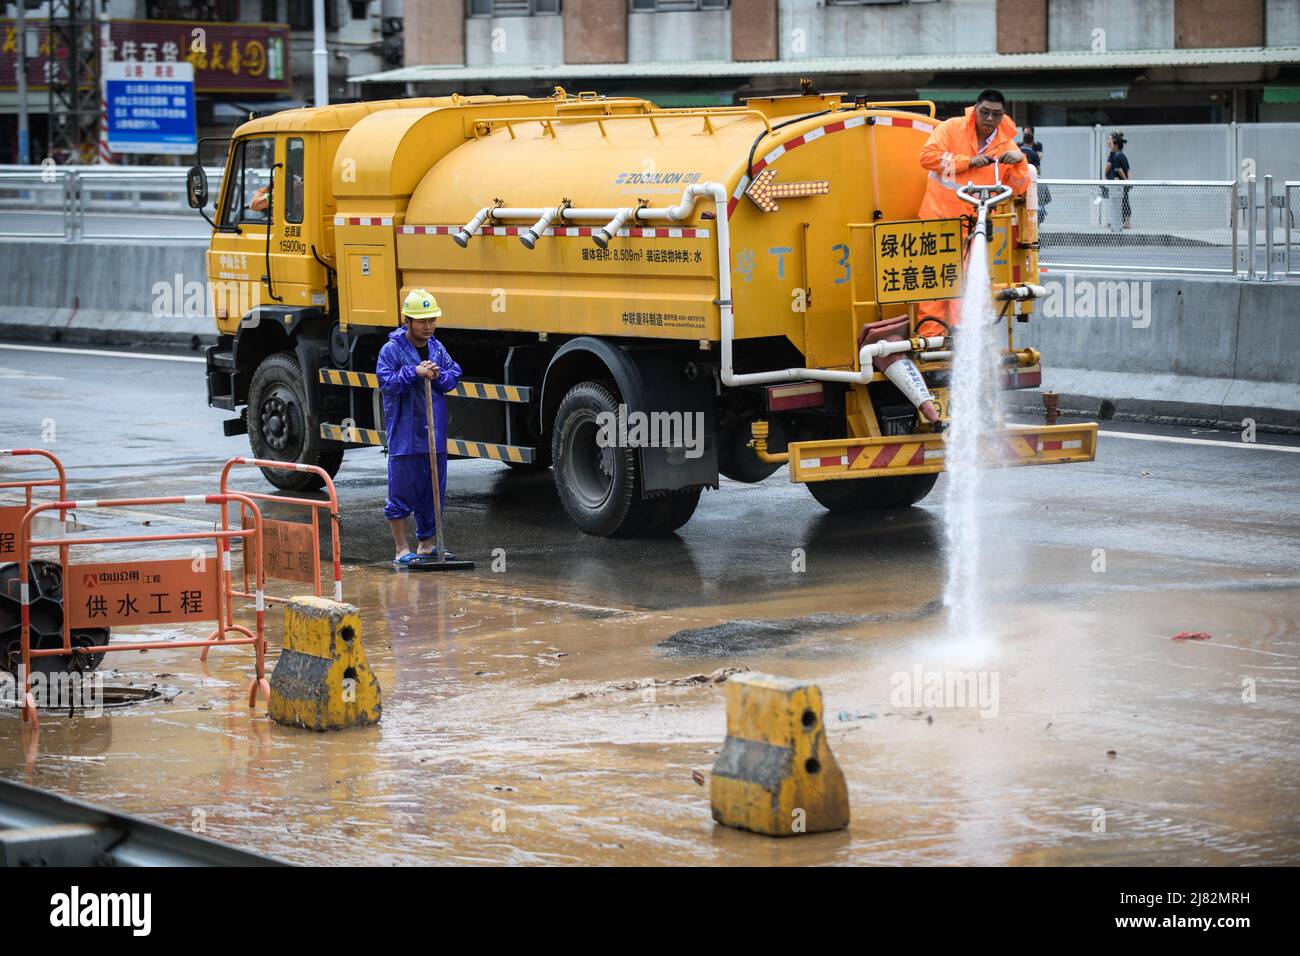 ZHONGSHAN, CHINA - MAY 12, 2022 - Cleaners clean a muddy street after a rainstorm in Zhongshan, Guangdong Province, China, May 12, 2022. Stock Photo